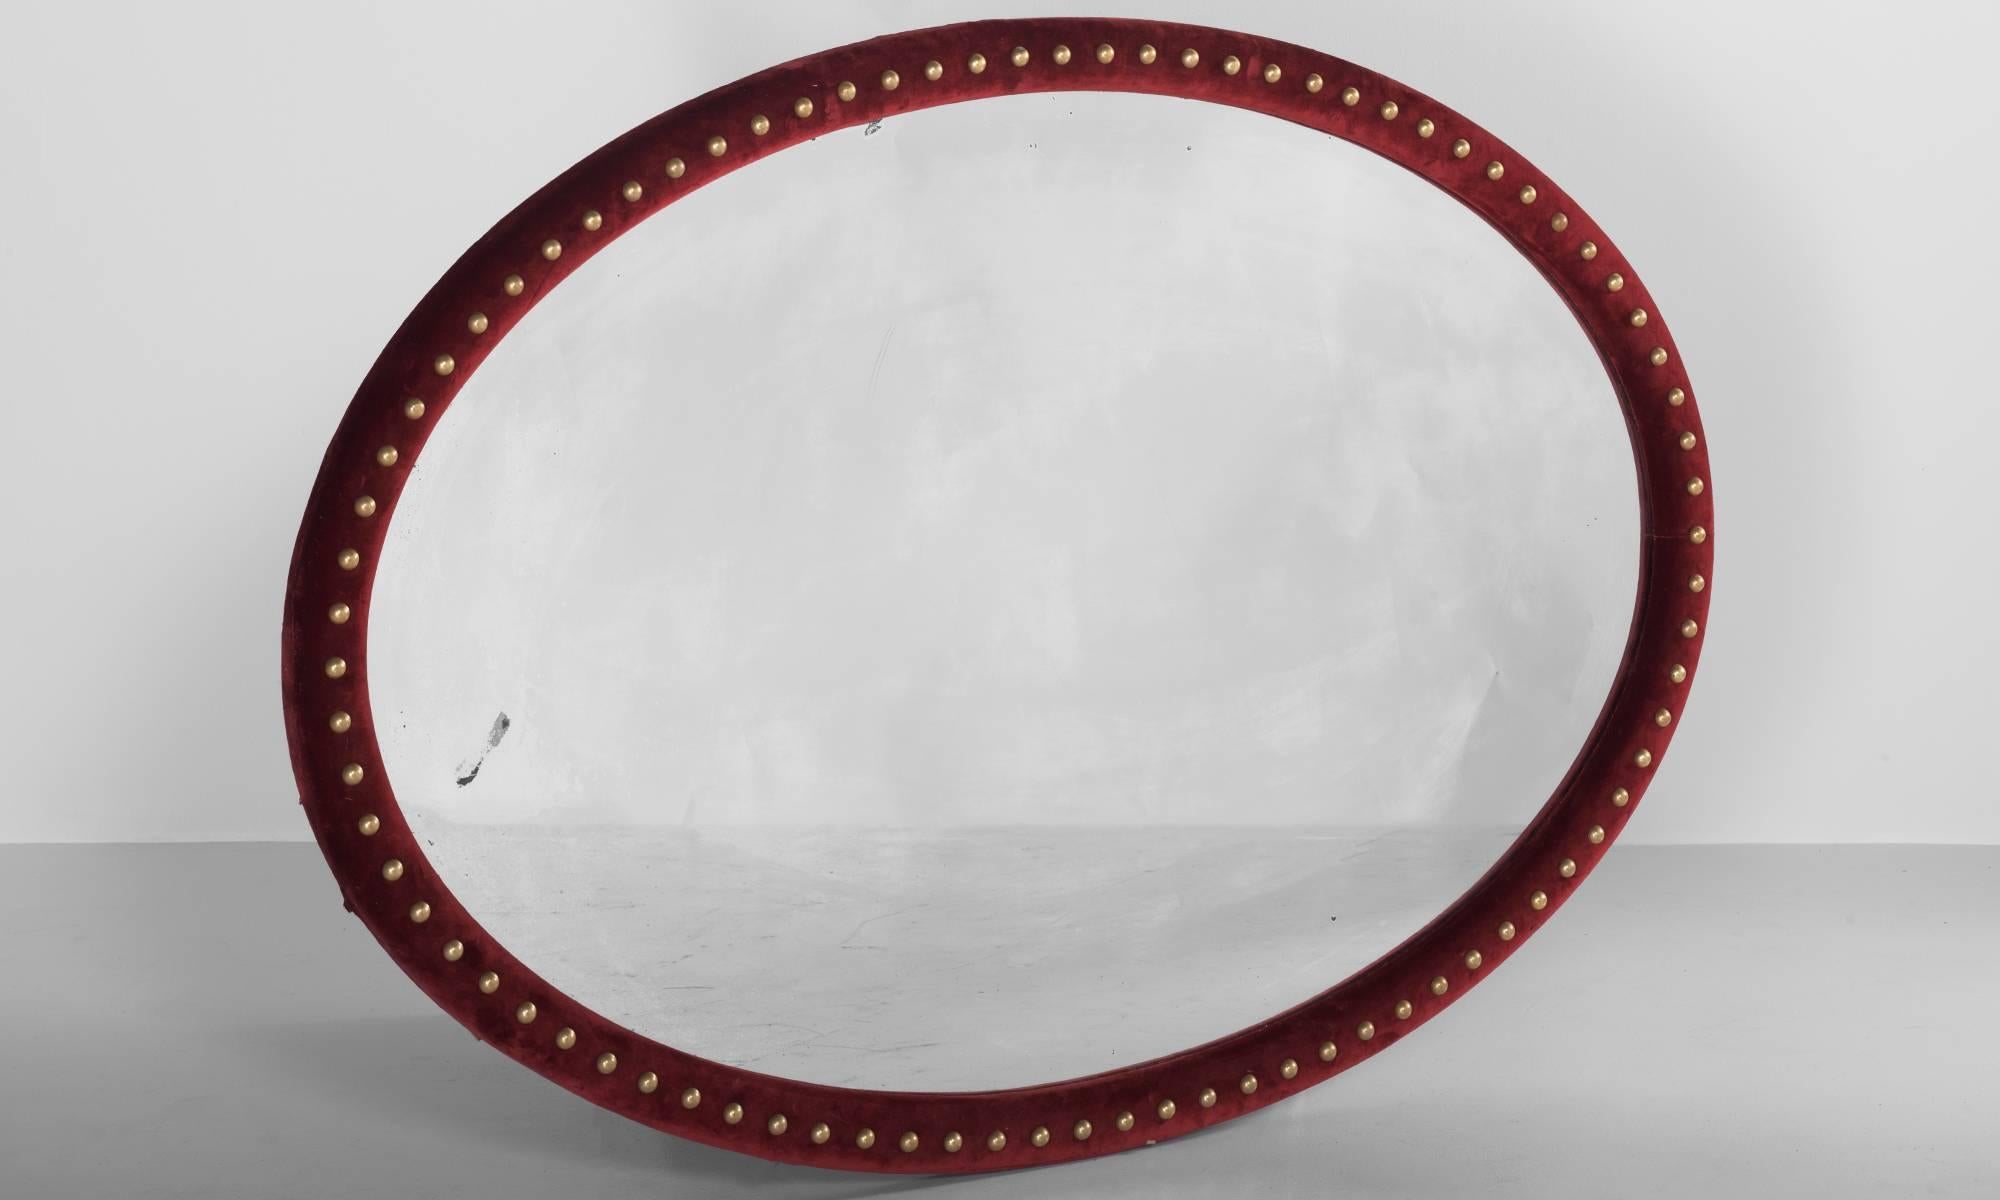 Unusual Victorian mirror with original mercury glass plate and red velvet surround, decorated with brass studs.